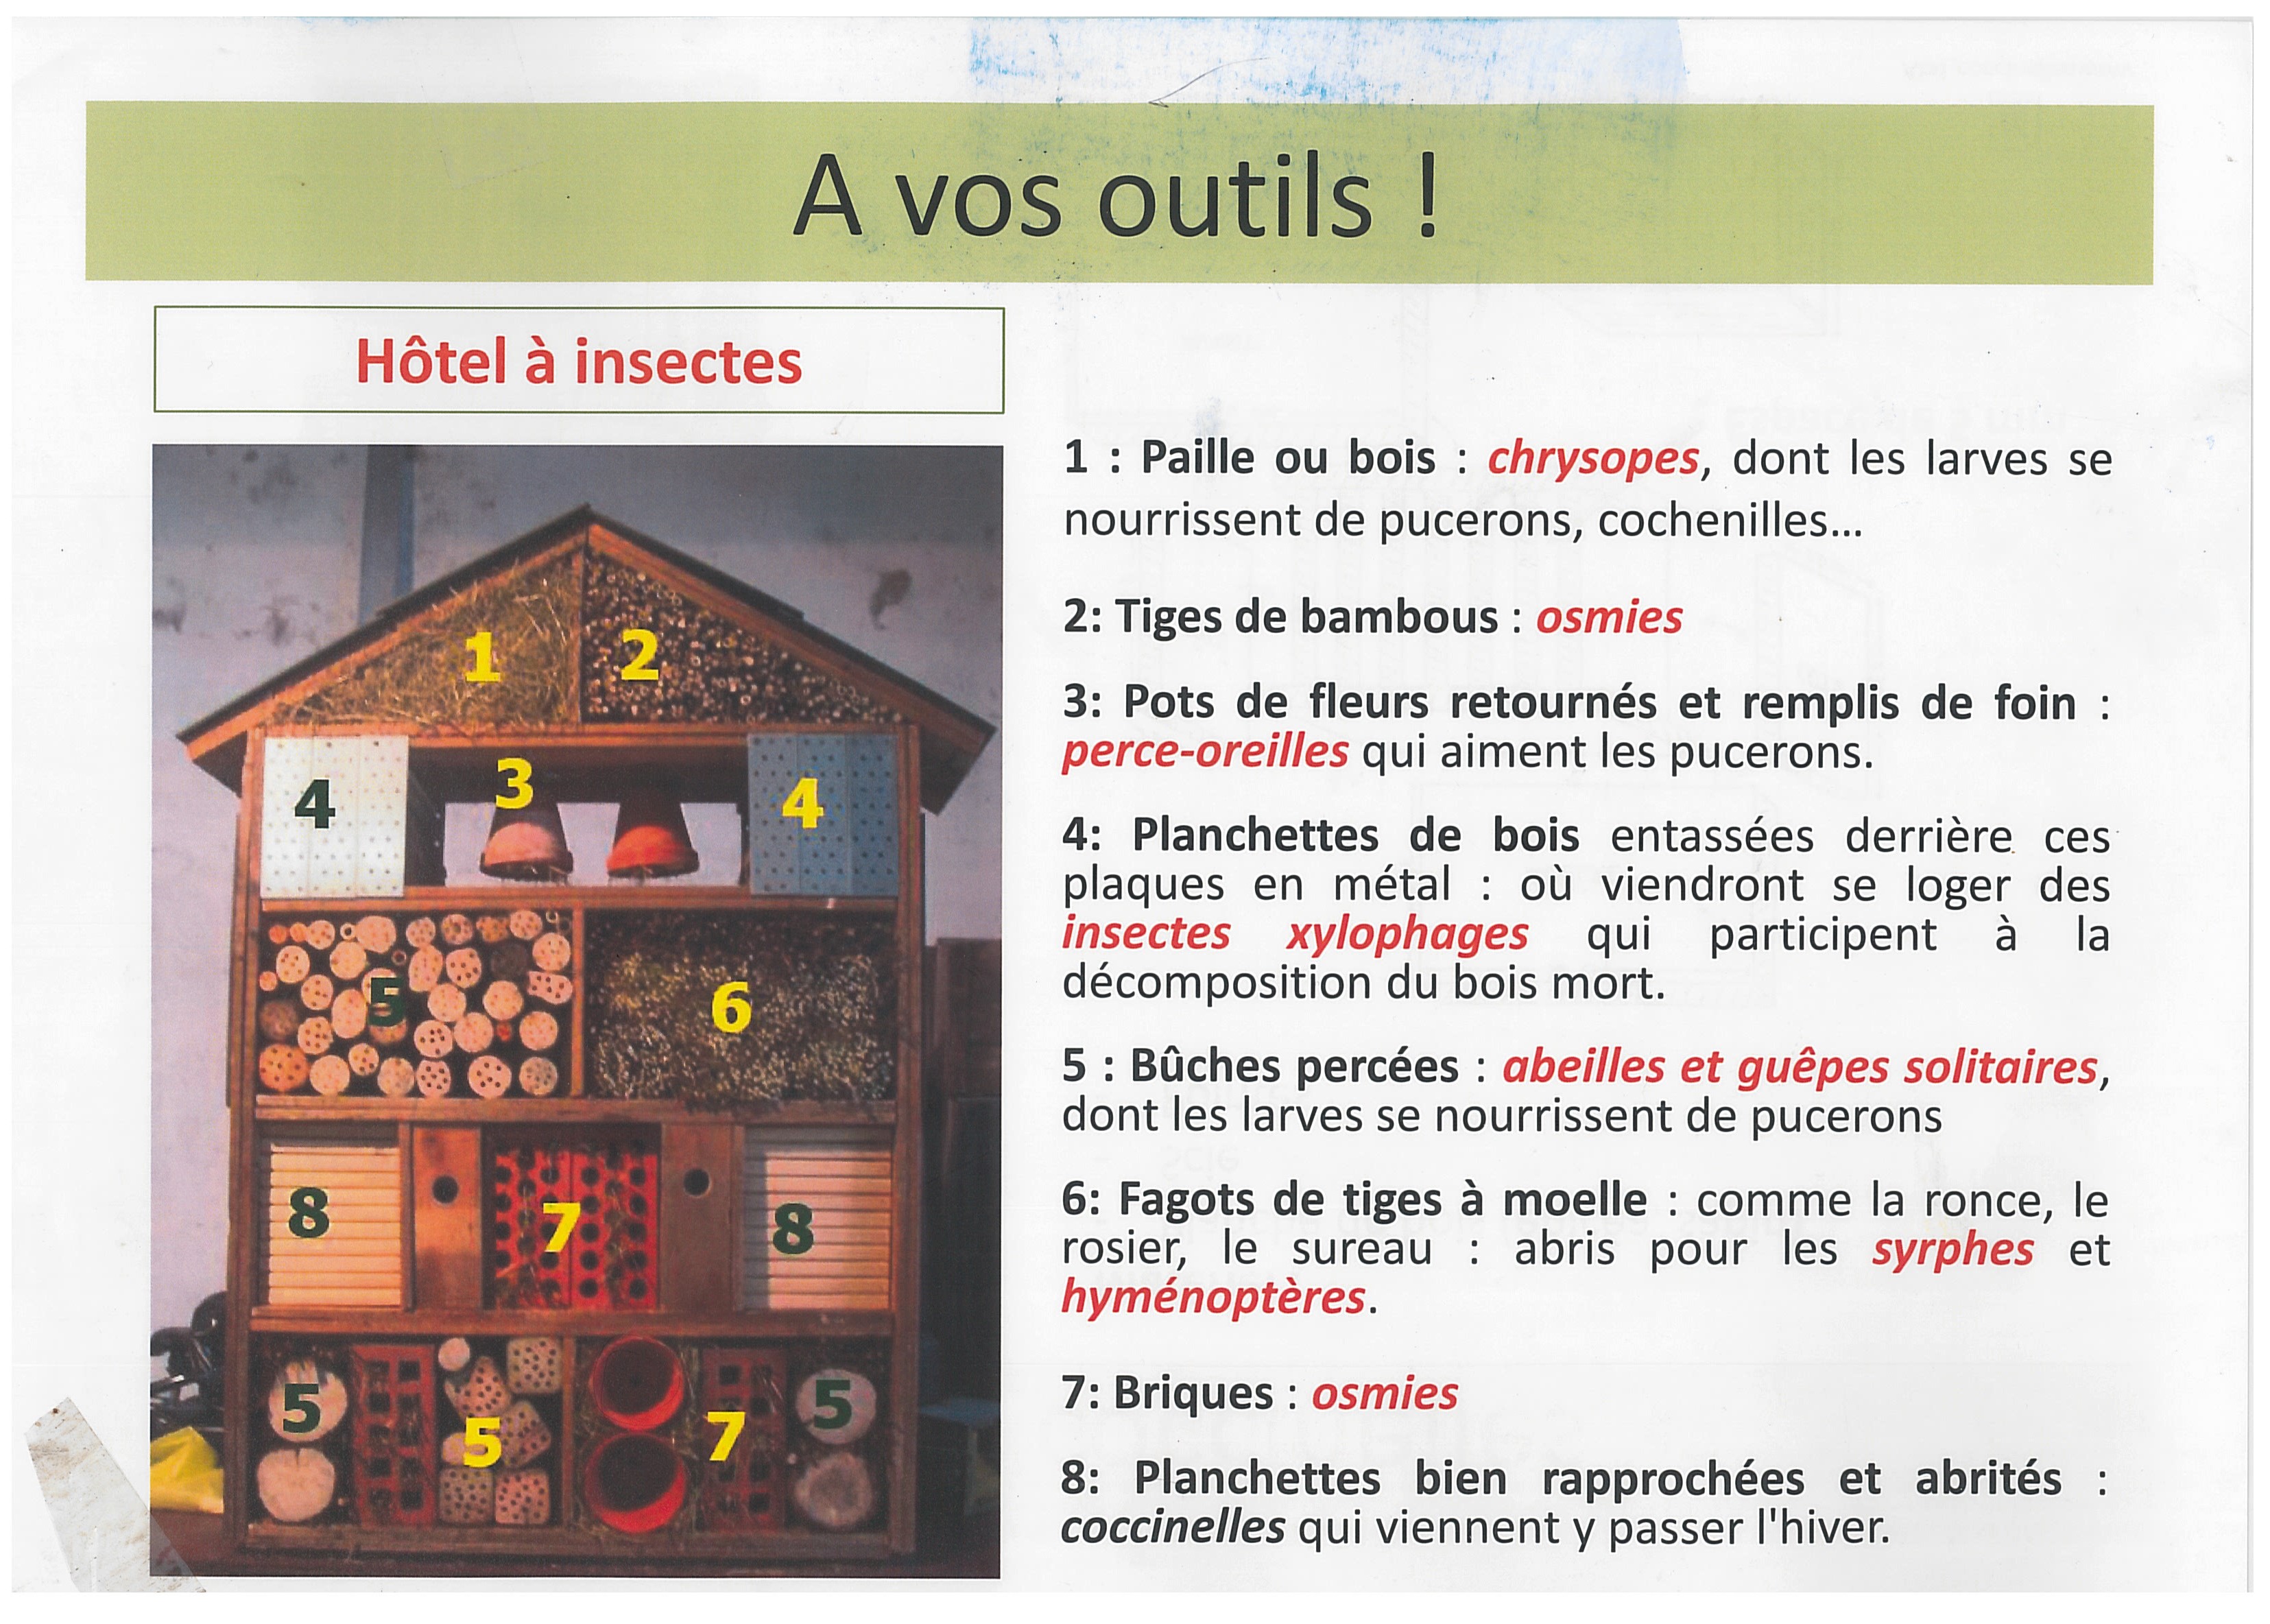 image hotel_a_insecte2.jpg (1.3MB)